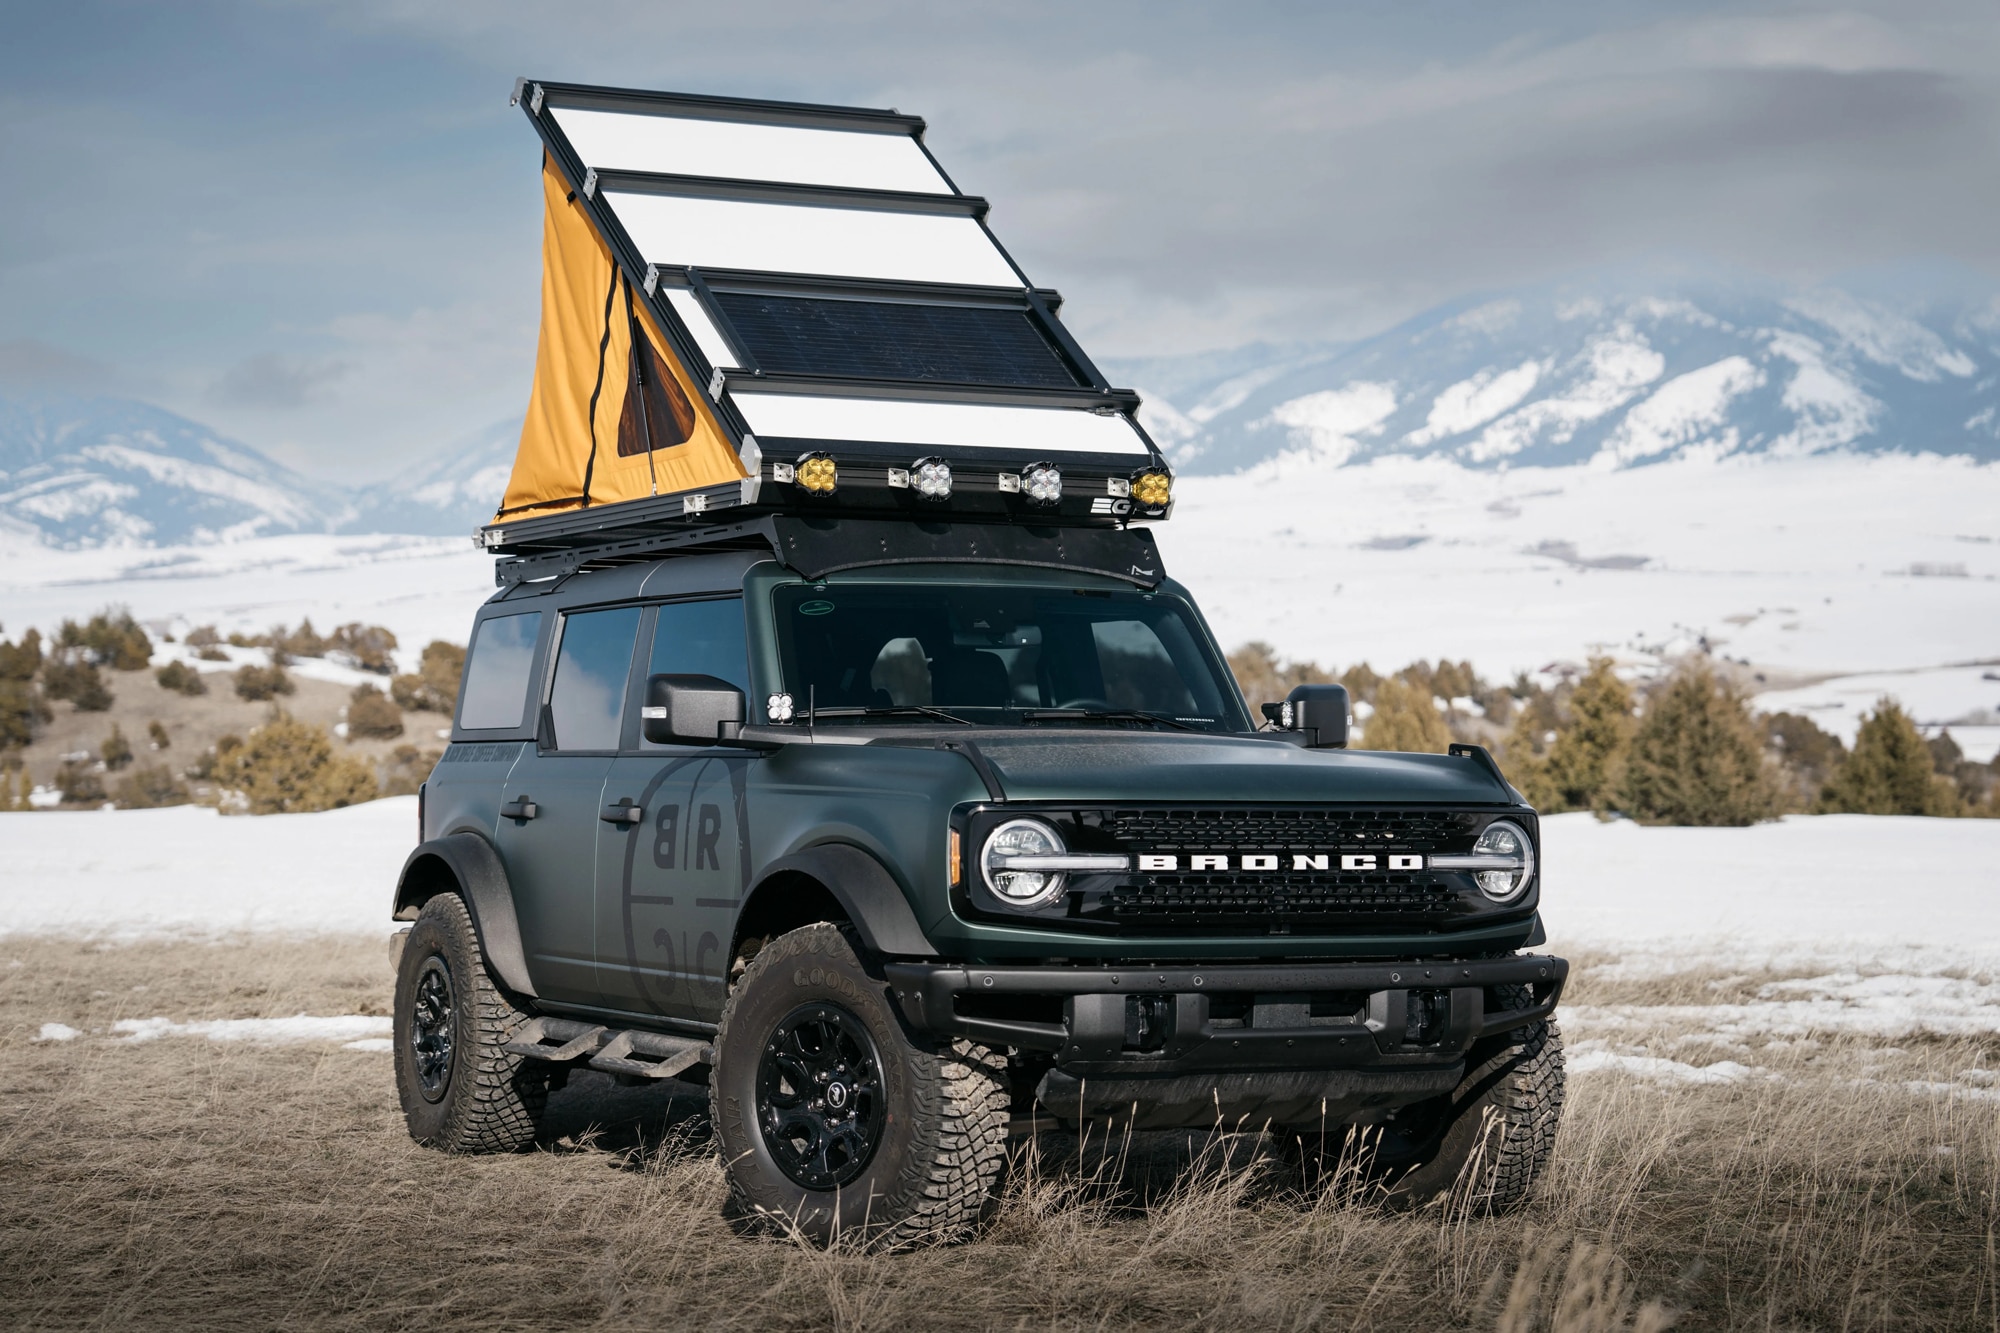 Open Go Fast Campers Platform RTT tent installed on a Ford Bronco in the snow